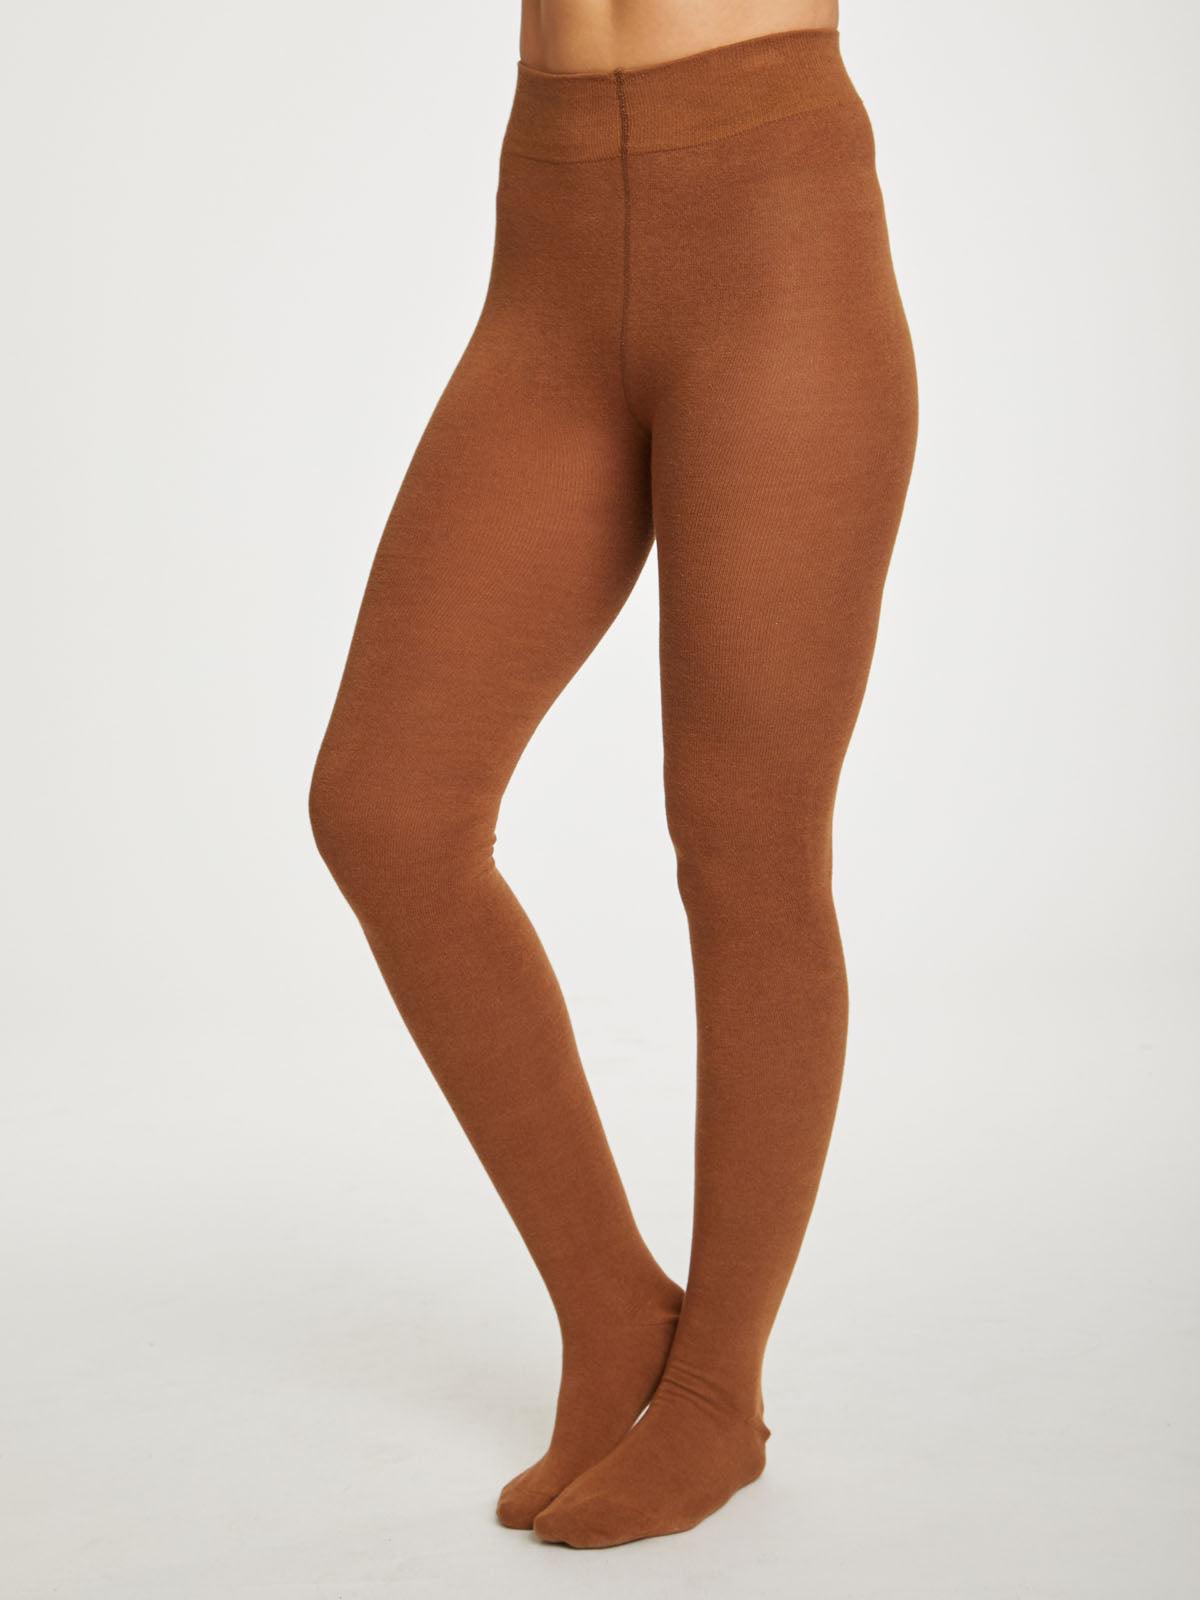 Bamboo Essential Plain Tights - Thought Clothing UK